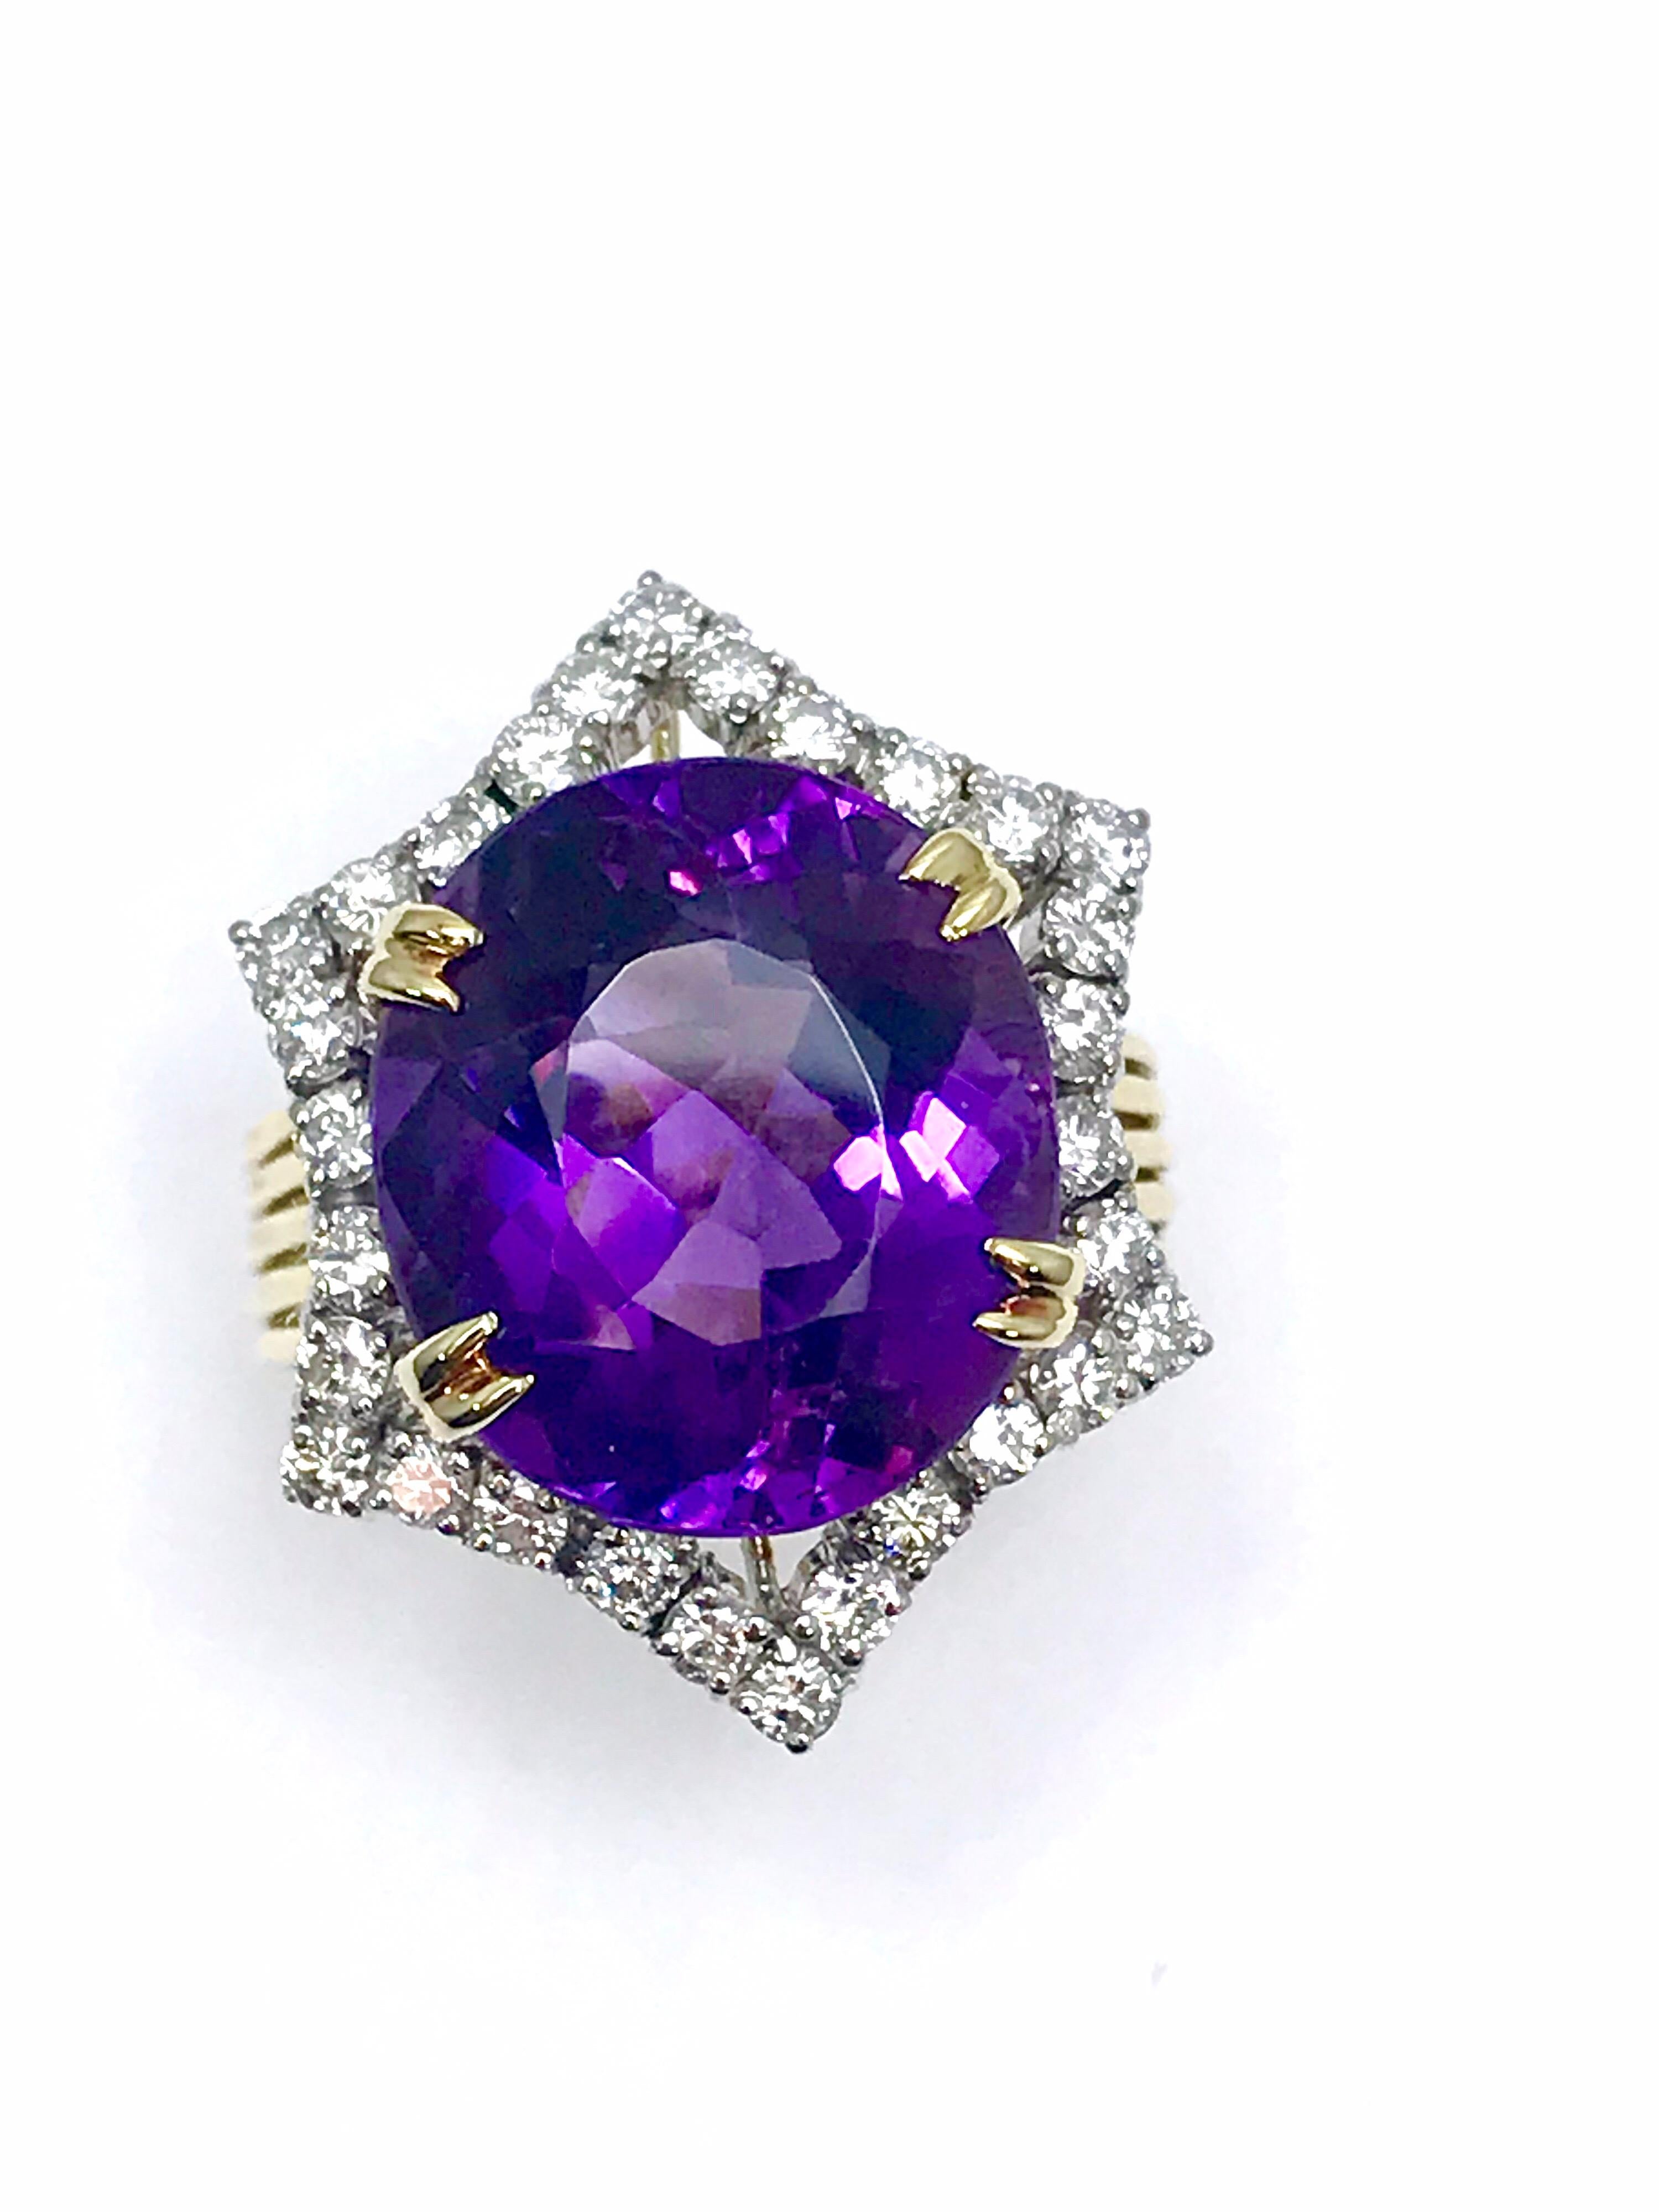 This is an extremely vibrant violet purple Amethyst and Diamond cocktail ring.  The 12.20 carat oval Amethyst is set with four double prongs, surrounded by a single row of inward curving diamonds.  The diamonds are round brilliant cuts weighing 1.10